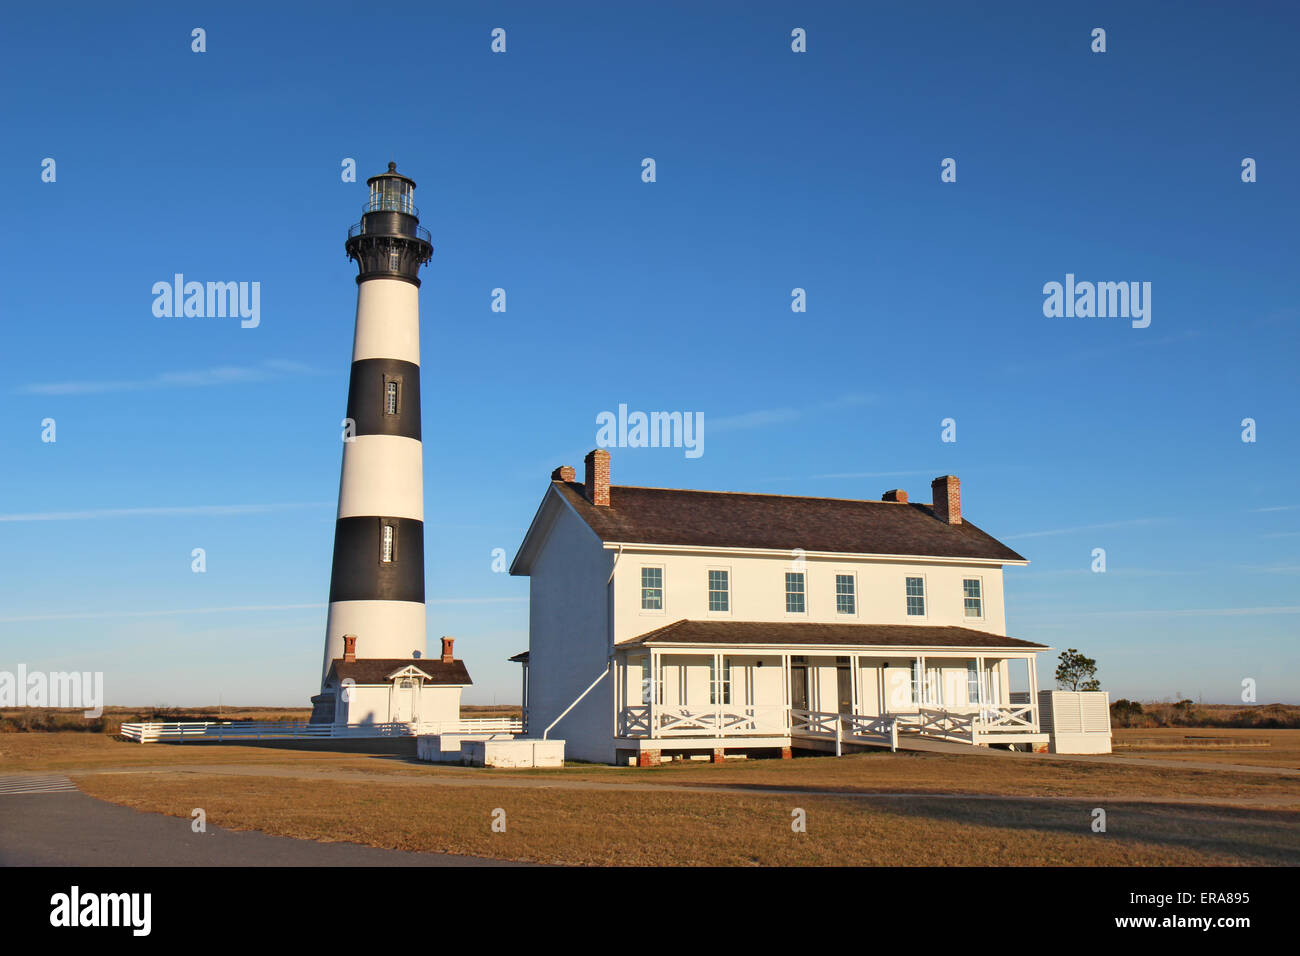 The Bodie Island lighthouse and keeper's quarters at the Cape Hatteras National Seashore against a bright blue sky Stock Photo